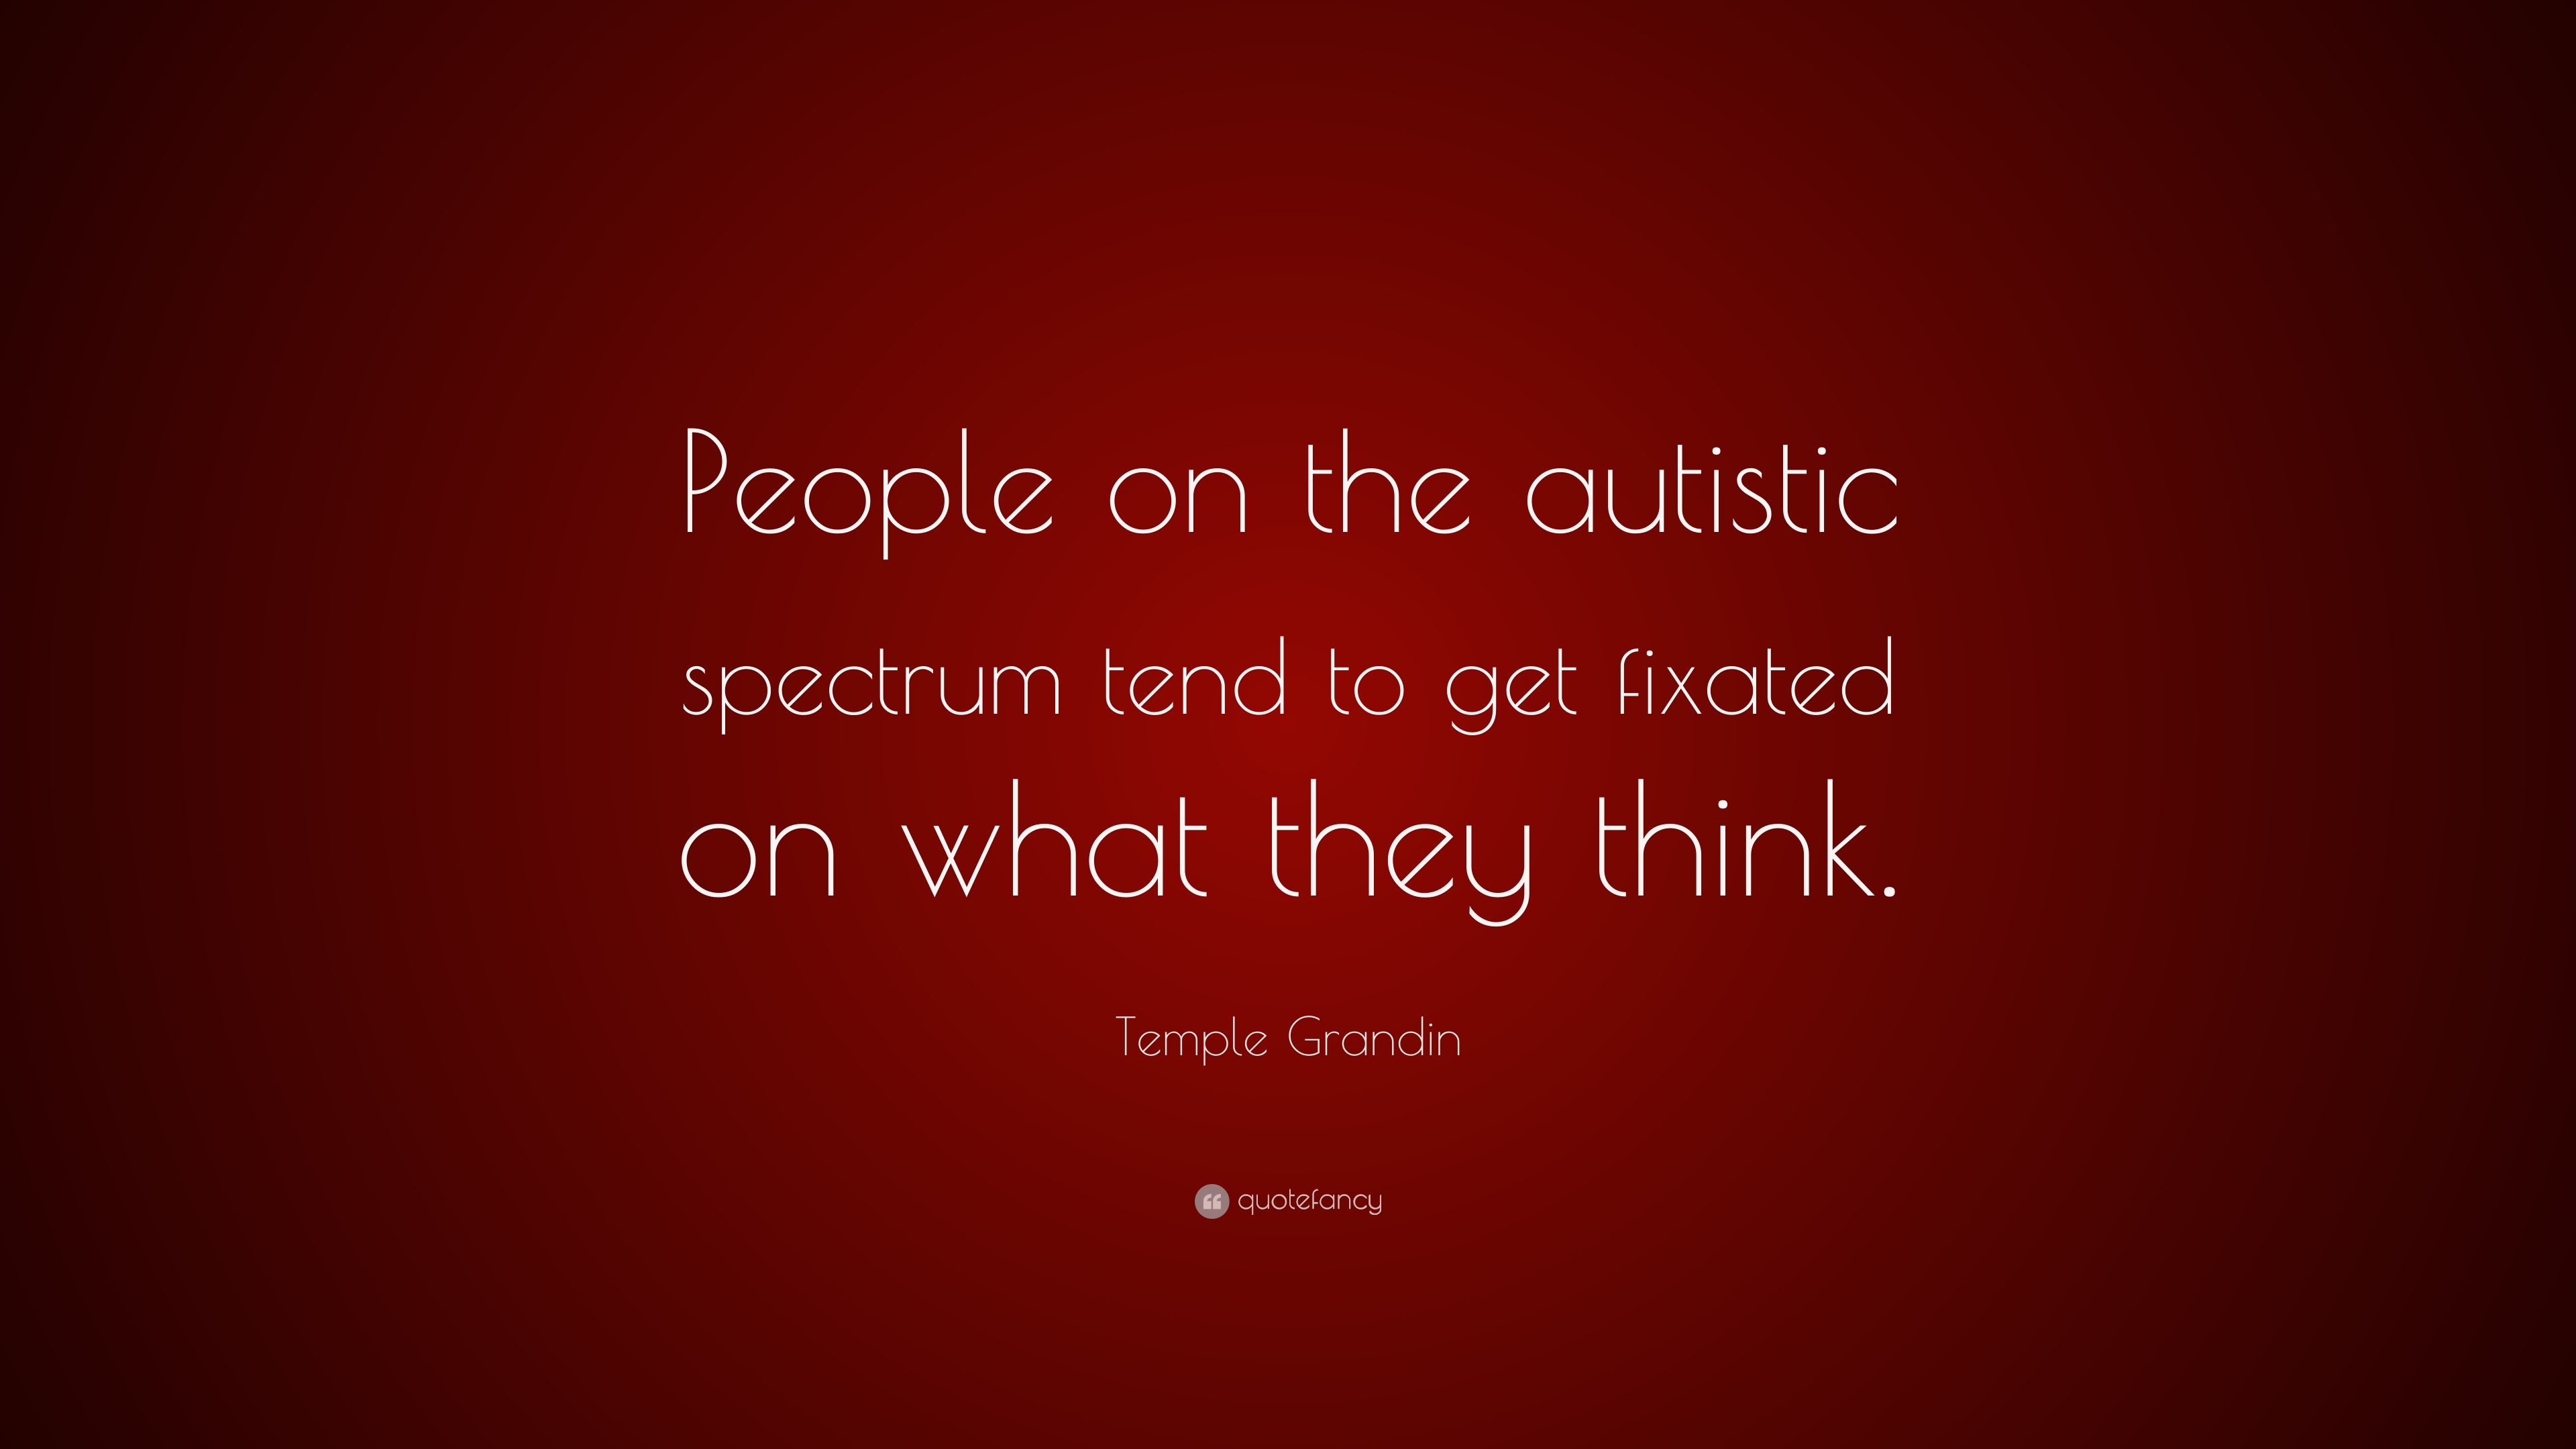 Temple Grandin Quote: “People on the autistic spectrum tend to get fixated on what they think.” (7 wallpaper)